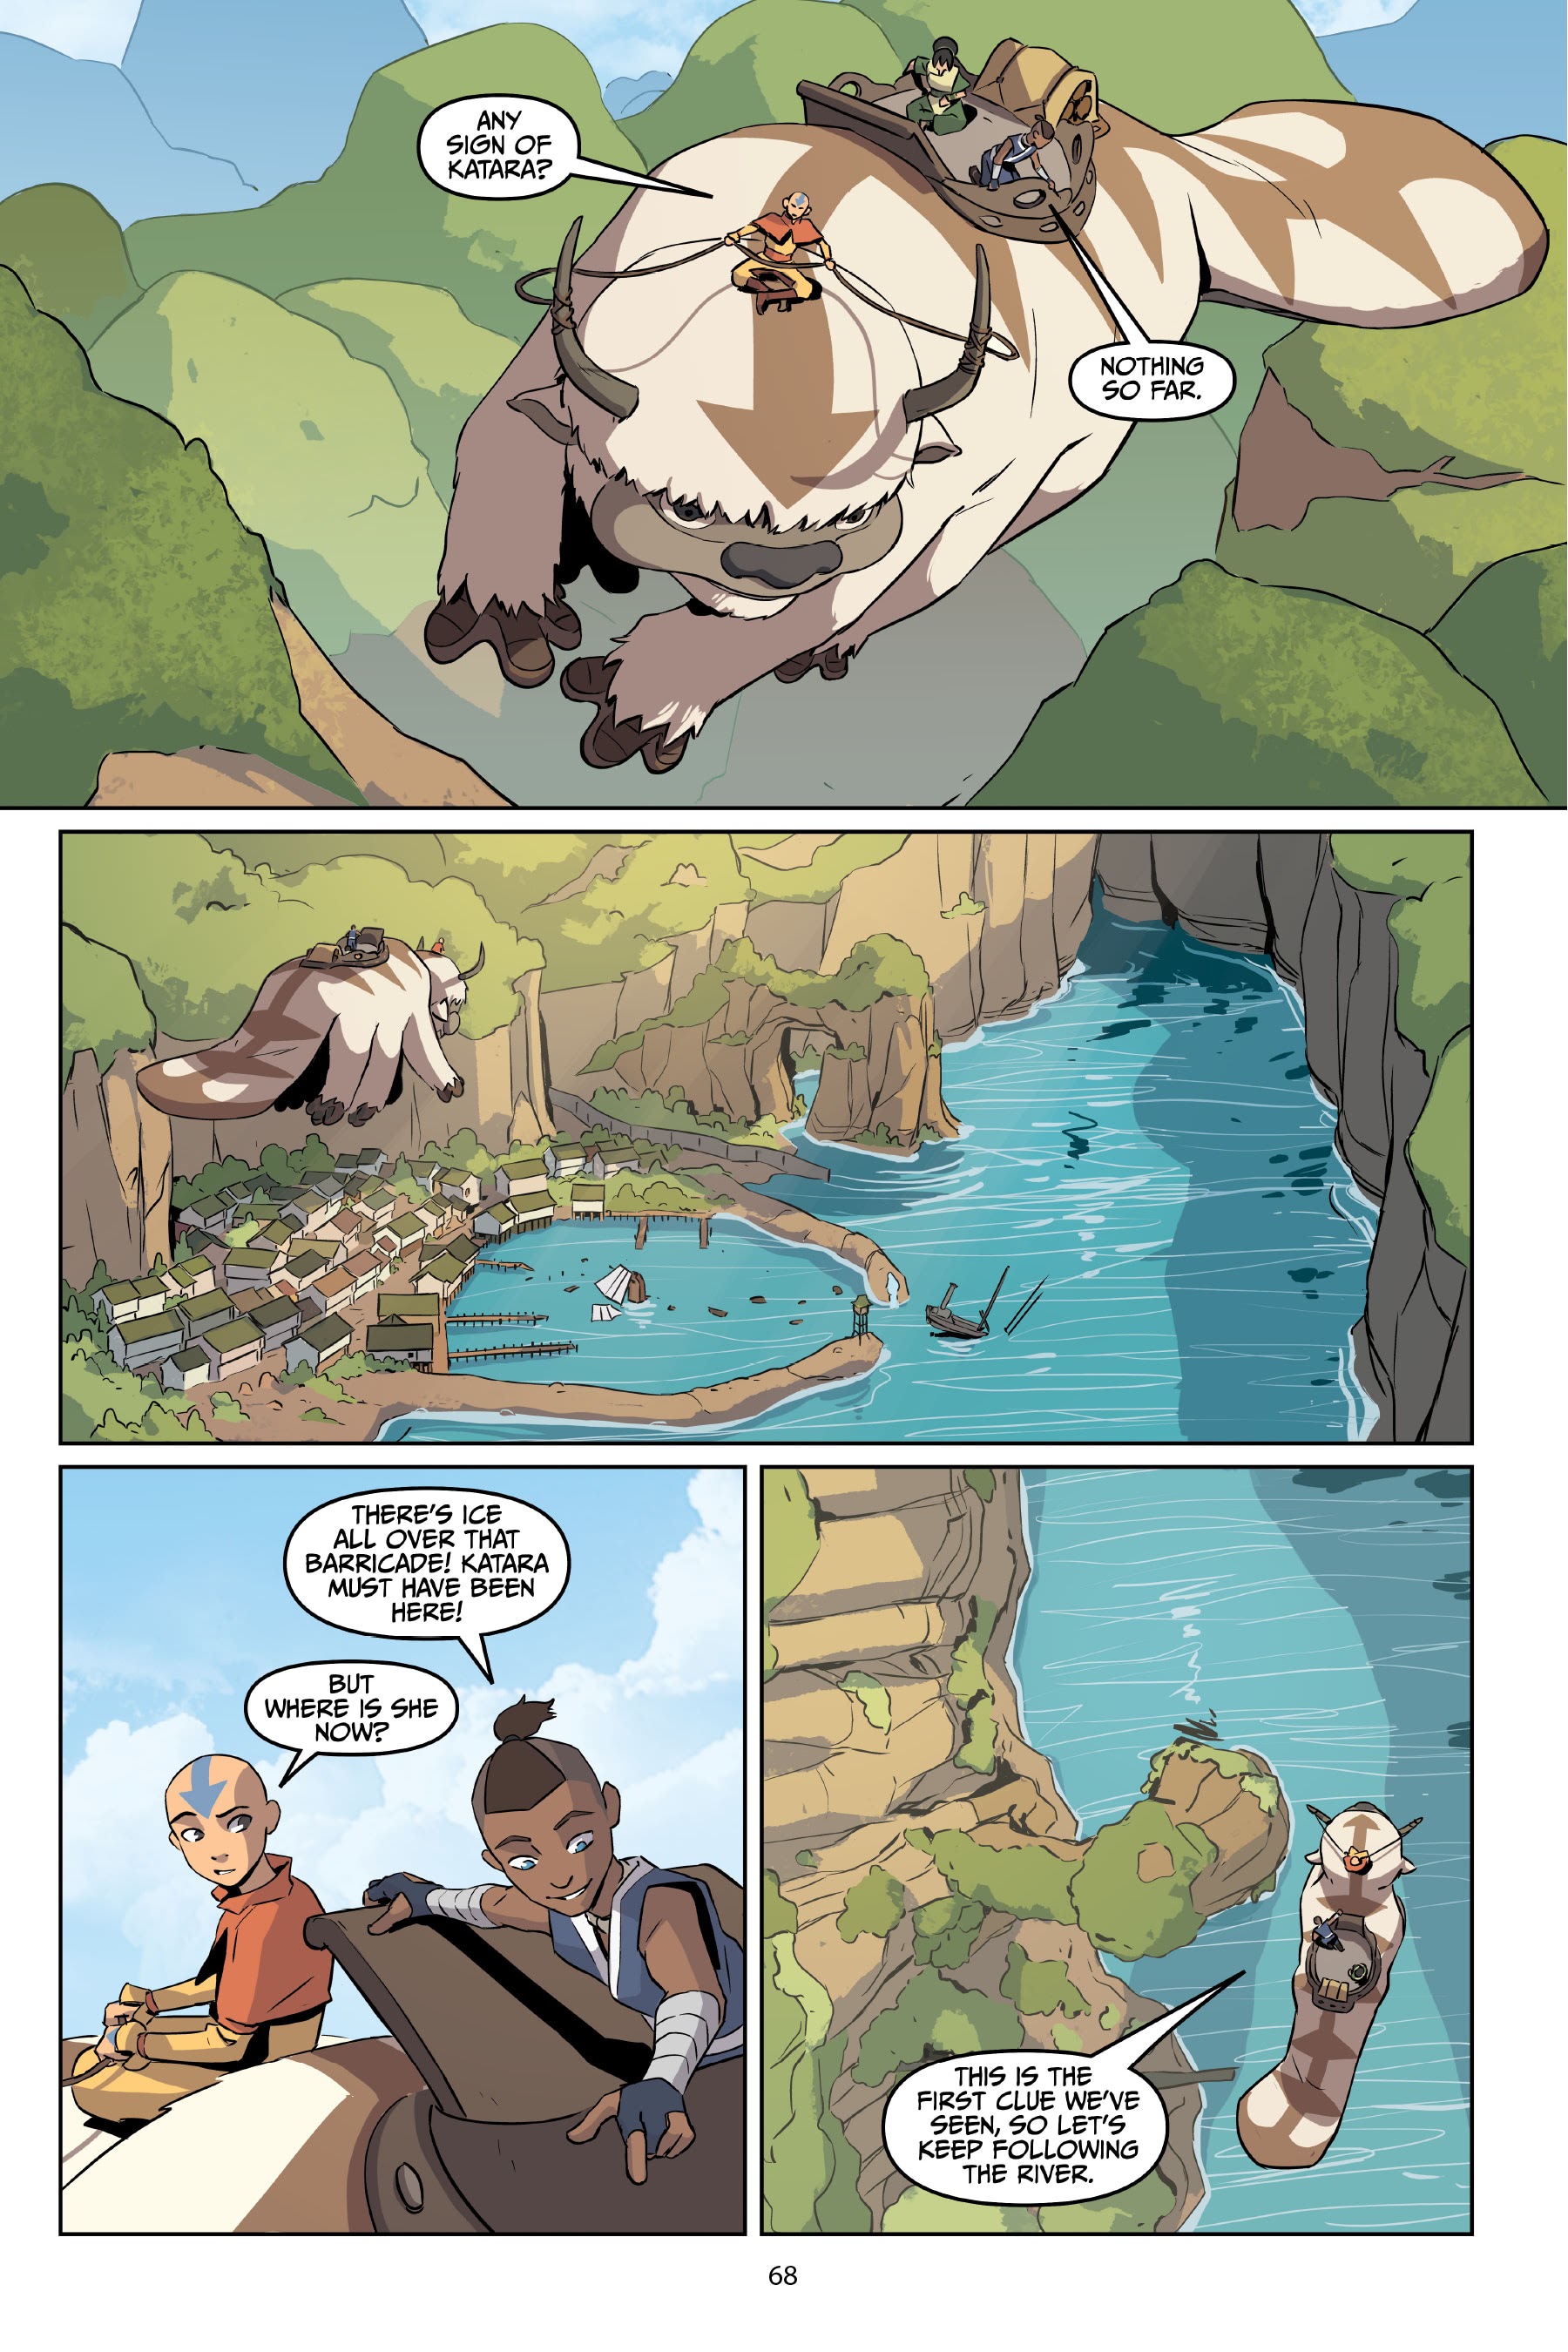 Read online Avatar: The Last Airbender—Katara and the Pirate's Silver comic -  Issue # TPB - 68